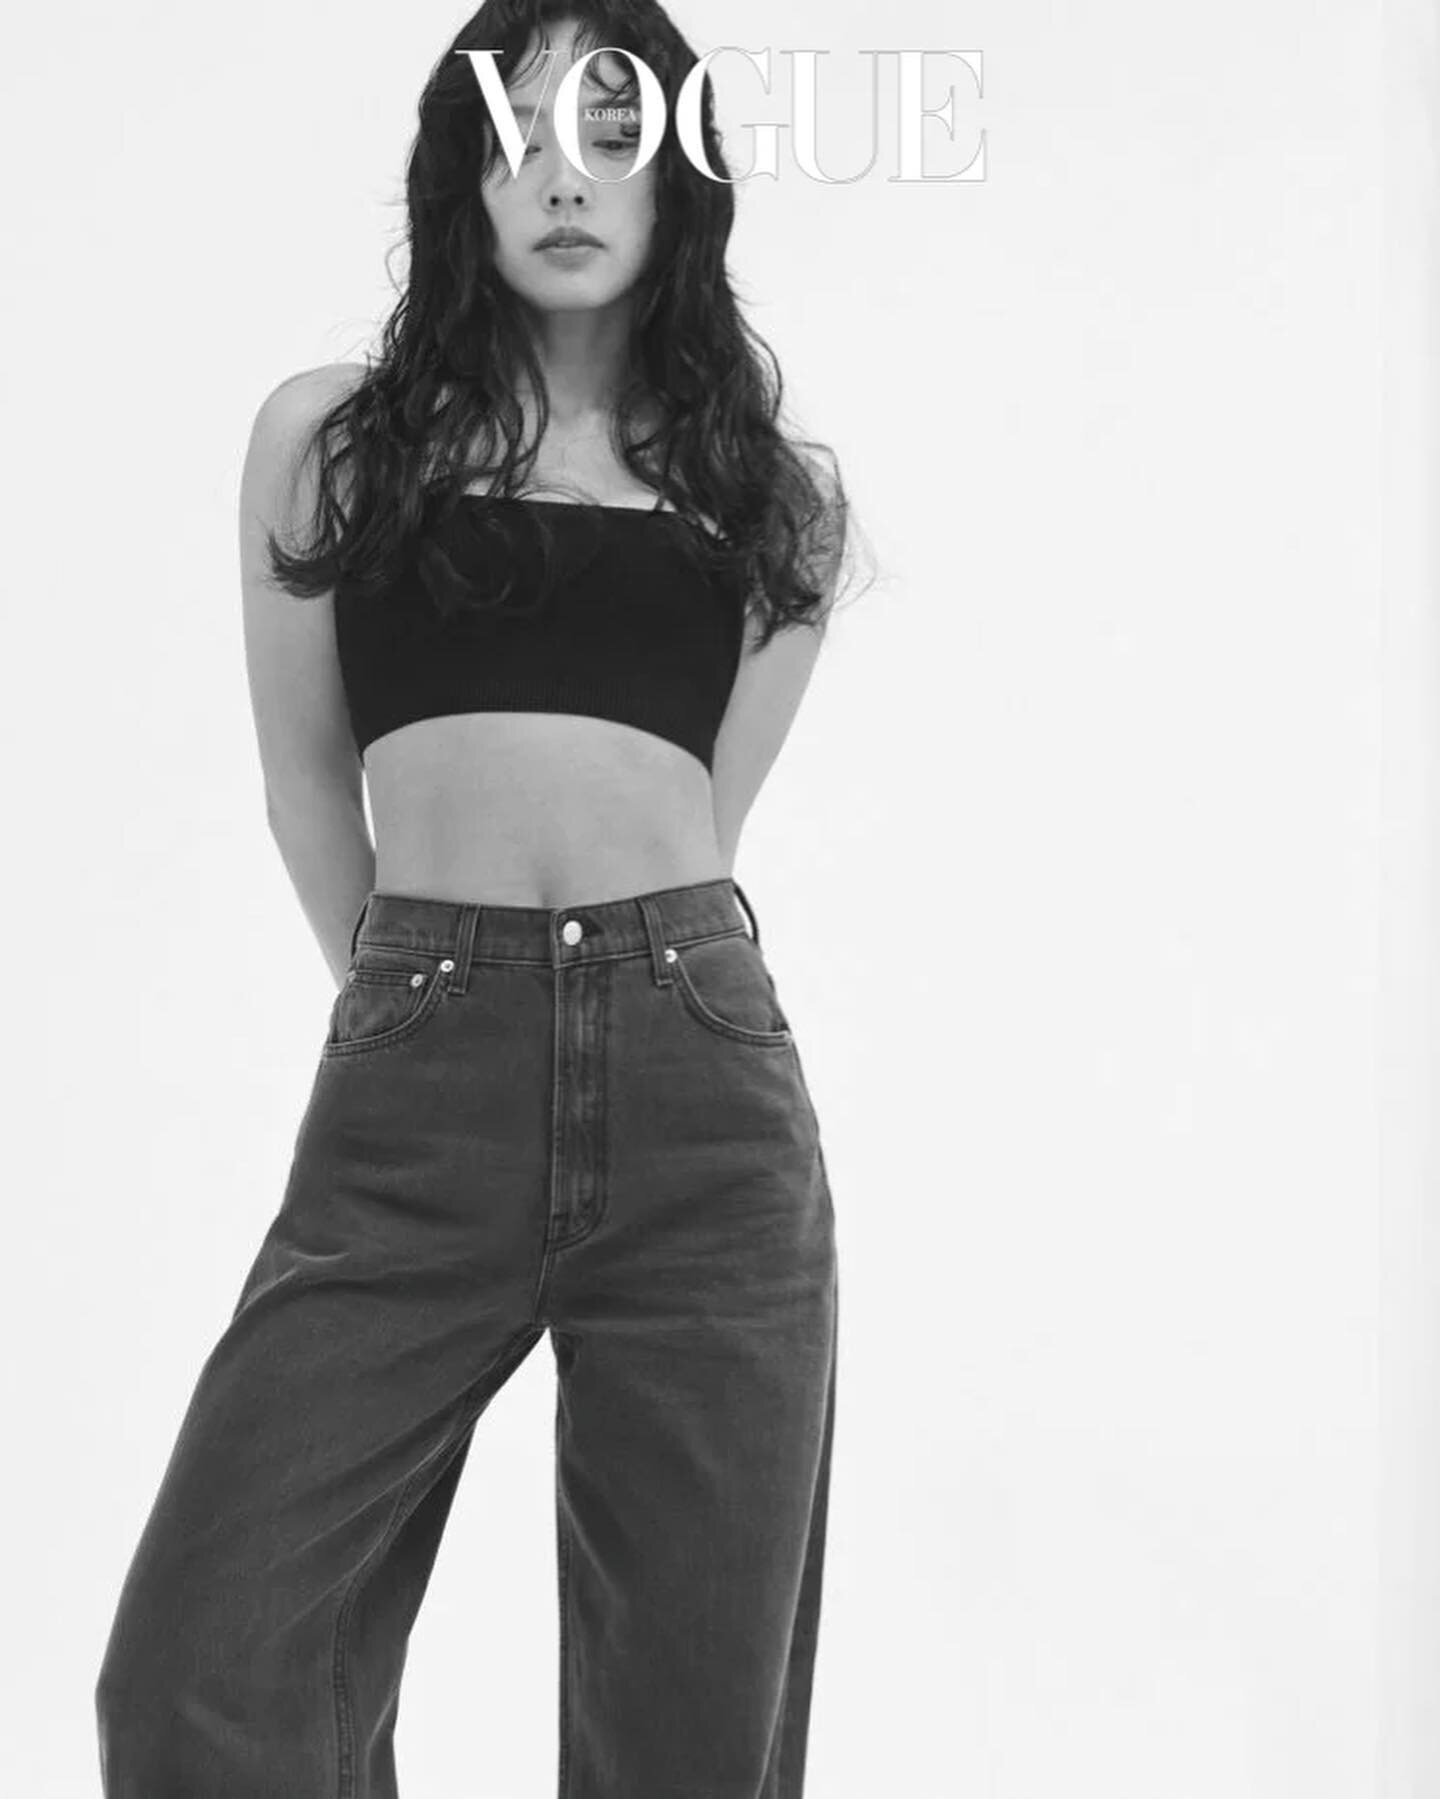 Lee Hyori for Vogue Korea May 2023 issue | kpopping